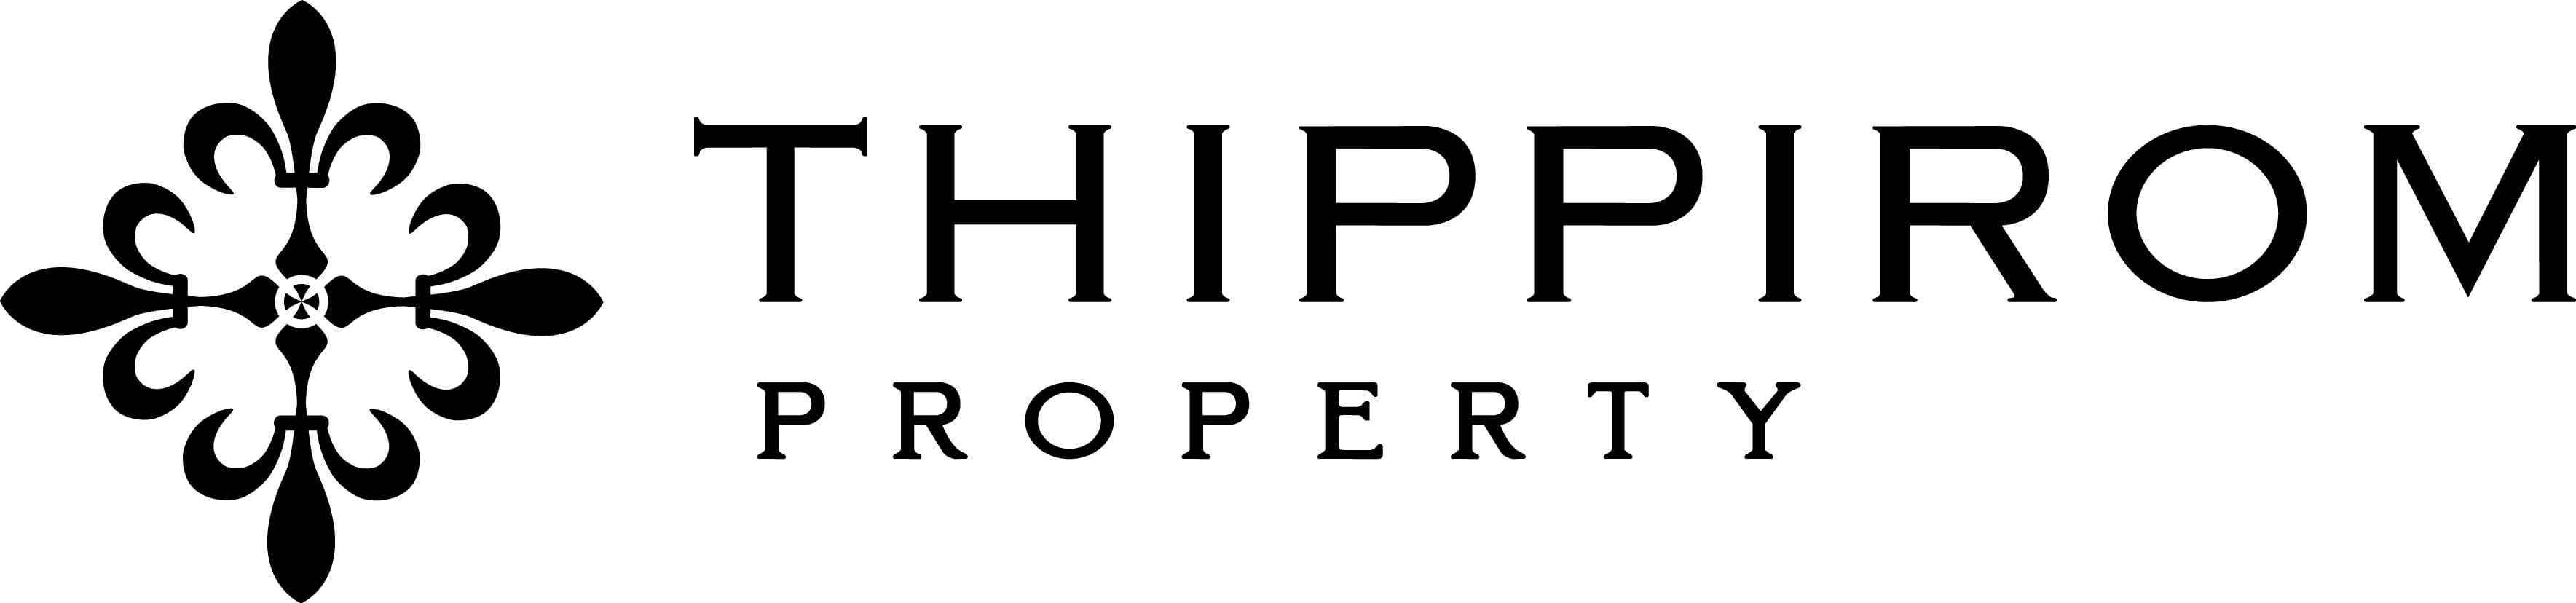 THIPPIROM PROPERTY COMPANY LIMITED